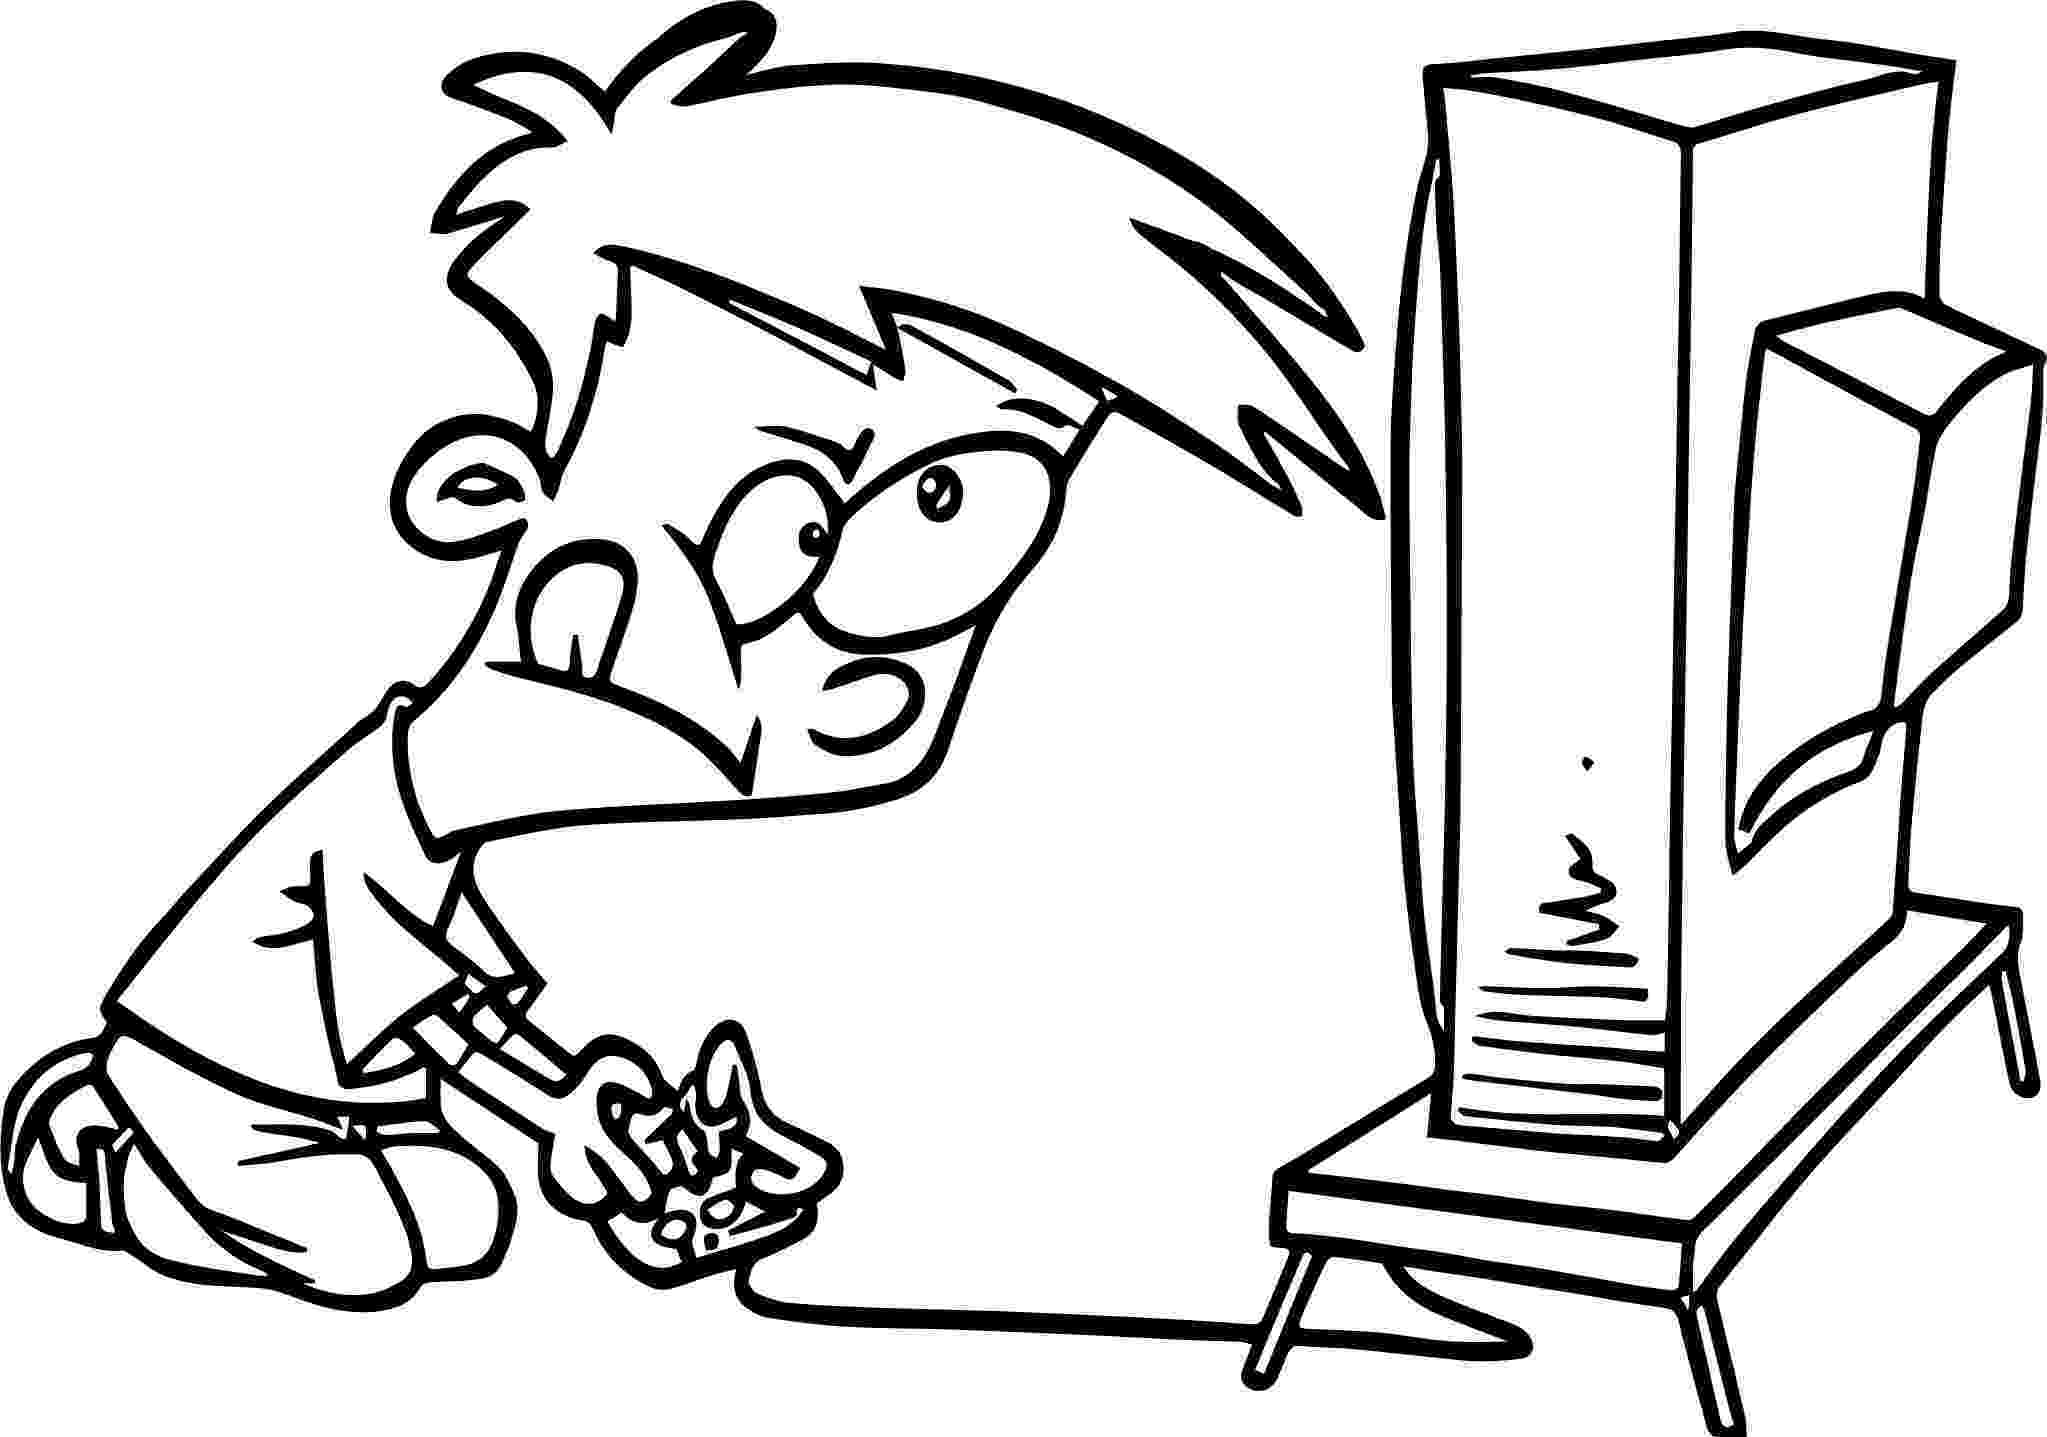 coloring picture games video games cartoon kid playing computer games coloring picture coloring games 